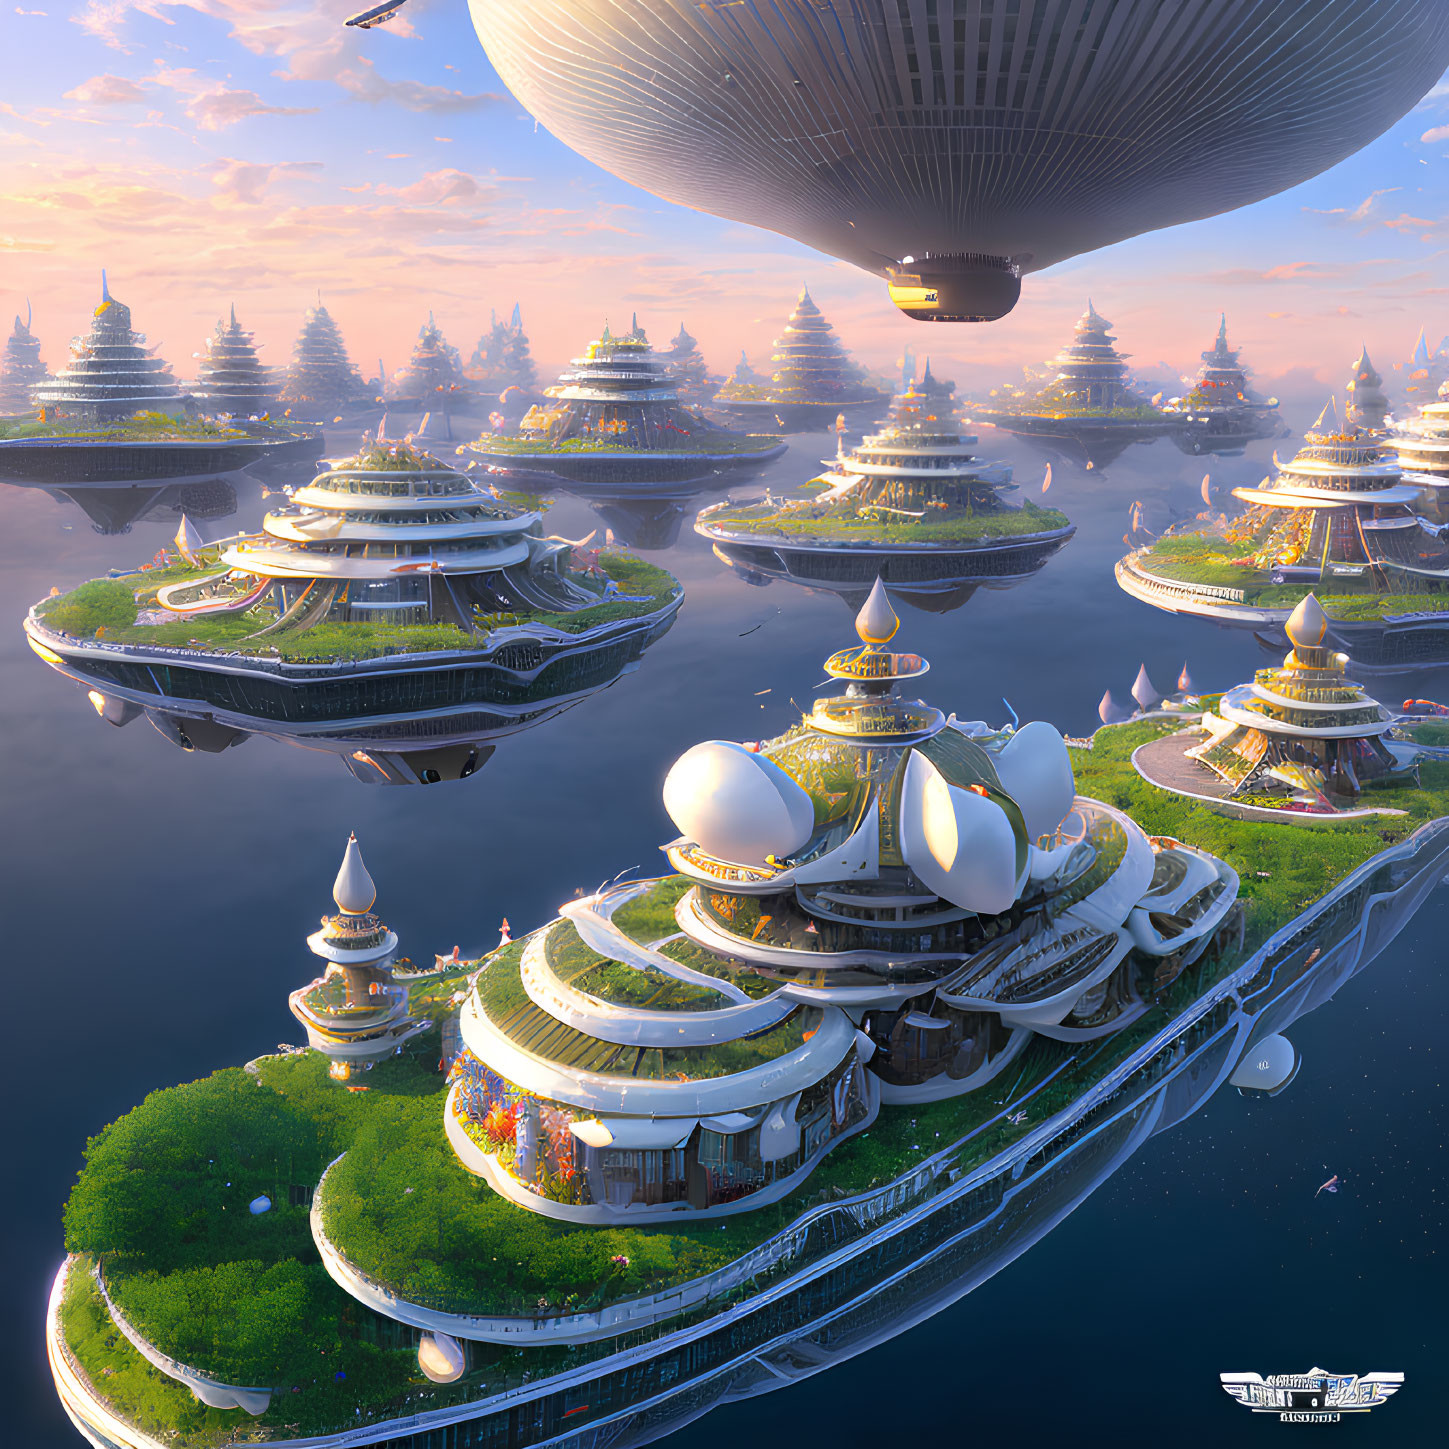 Futuristic cityscape with floating platforms and towering spires